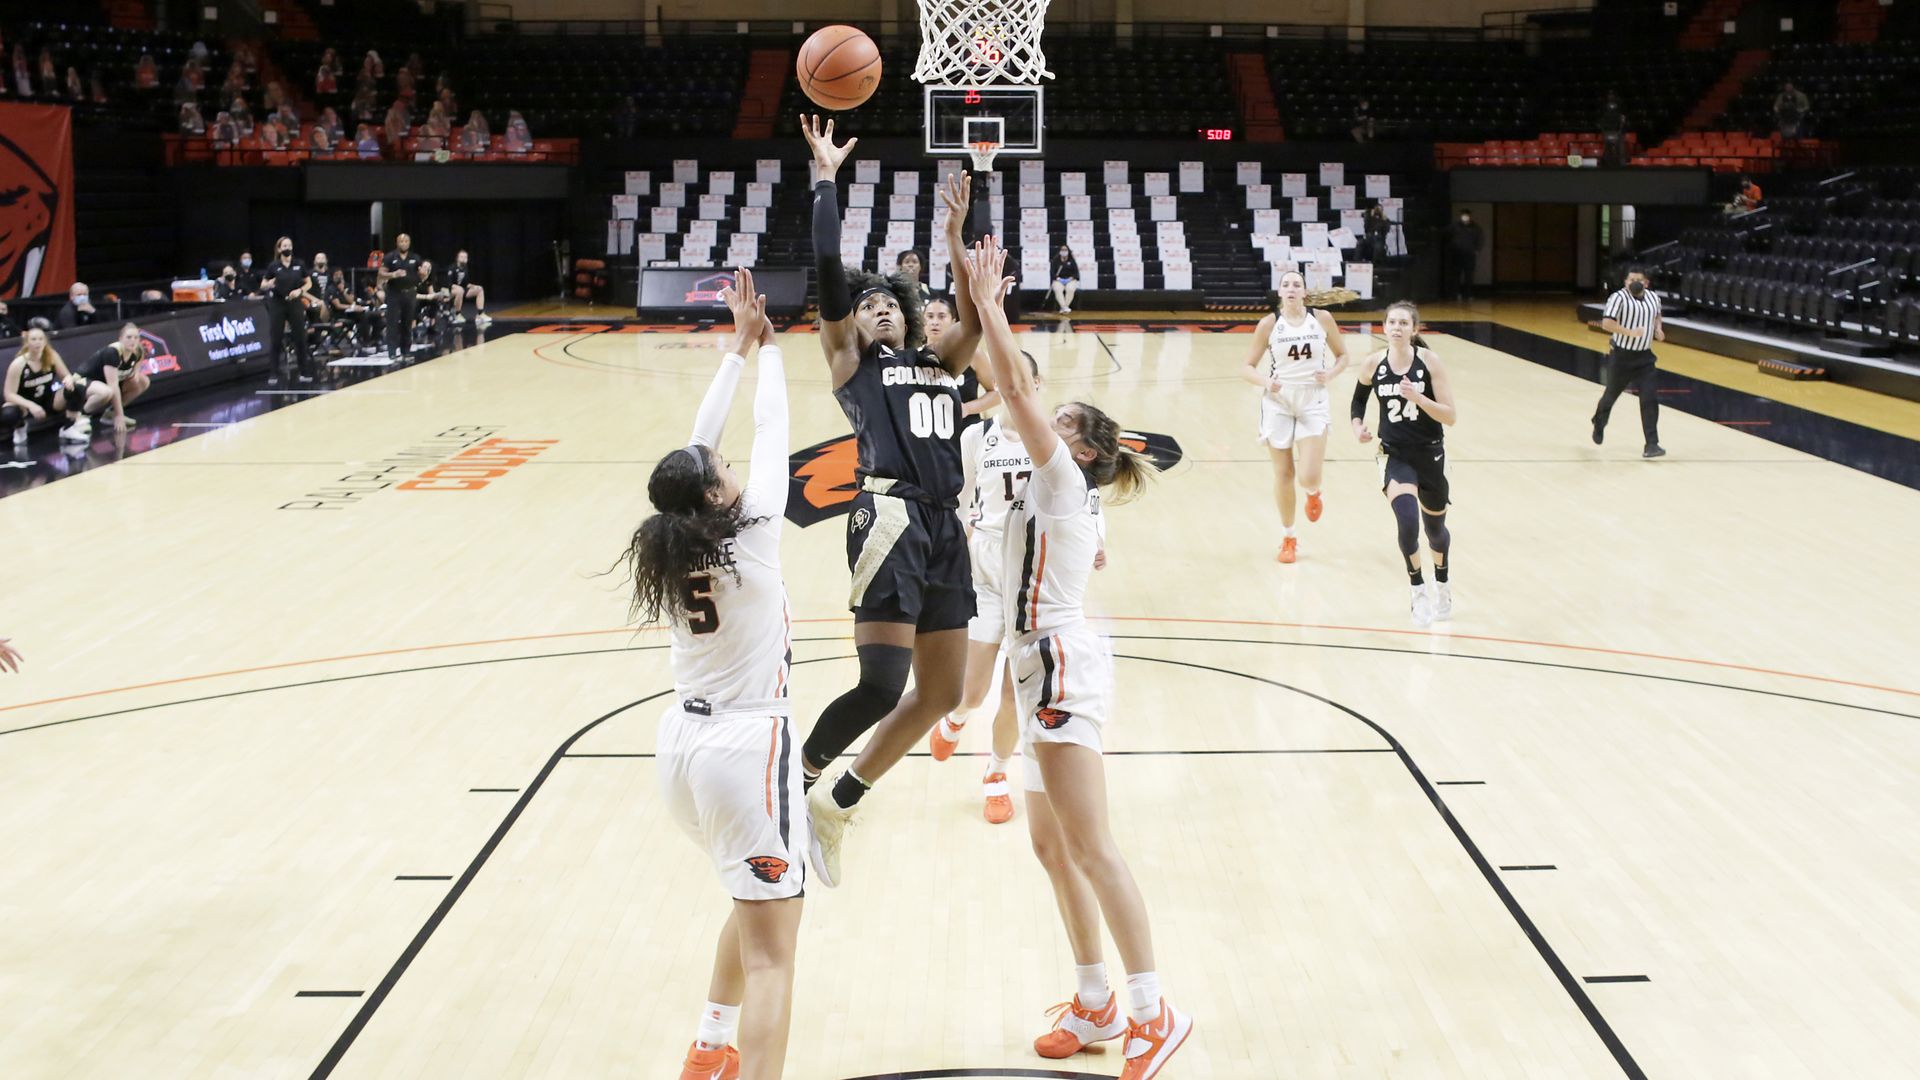 Colorado's Jaylyn Sherrod takes a shot against Oregon State in 2020. Photo: Soobum Im/Getty Images